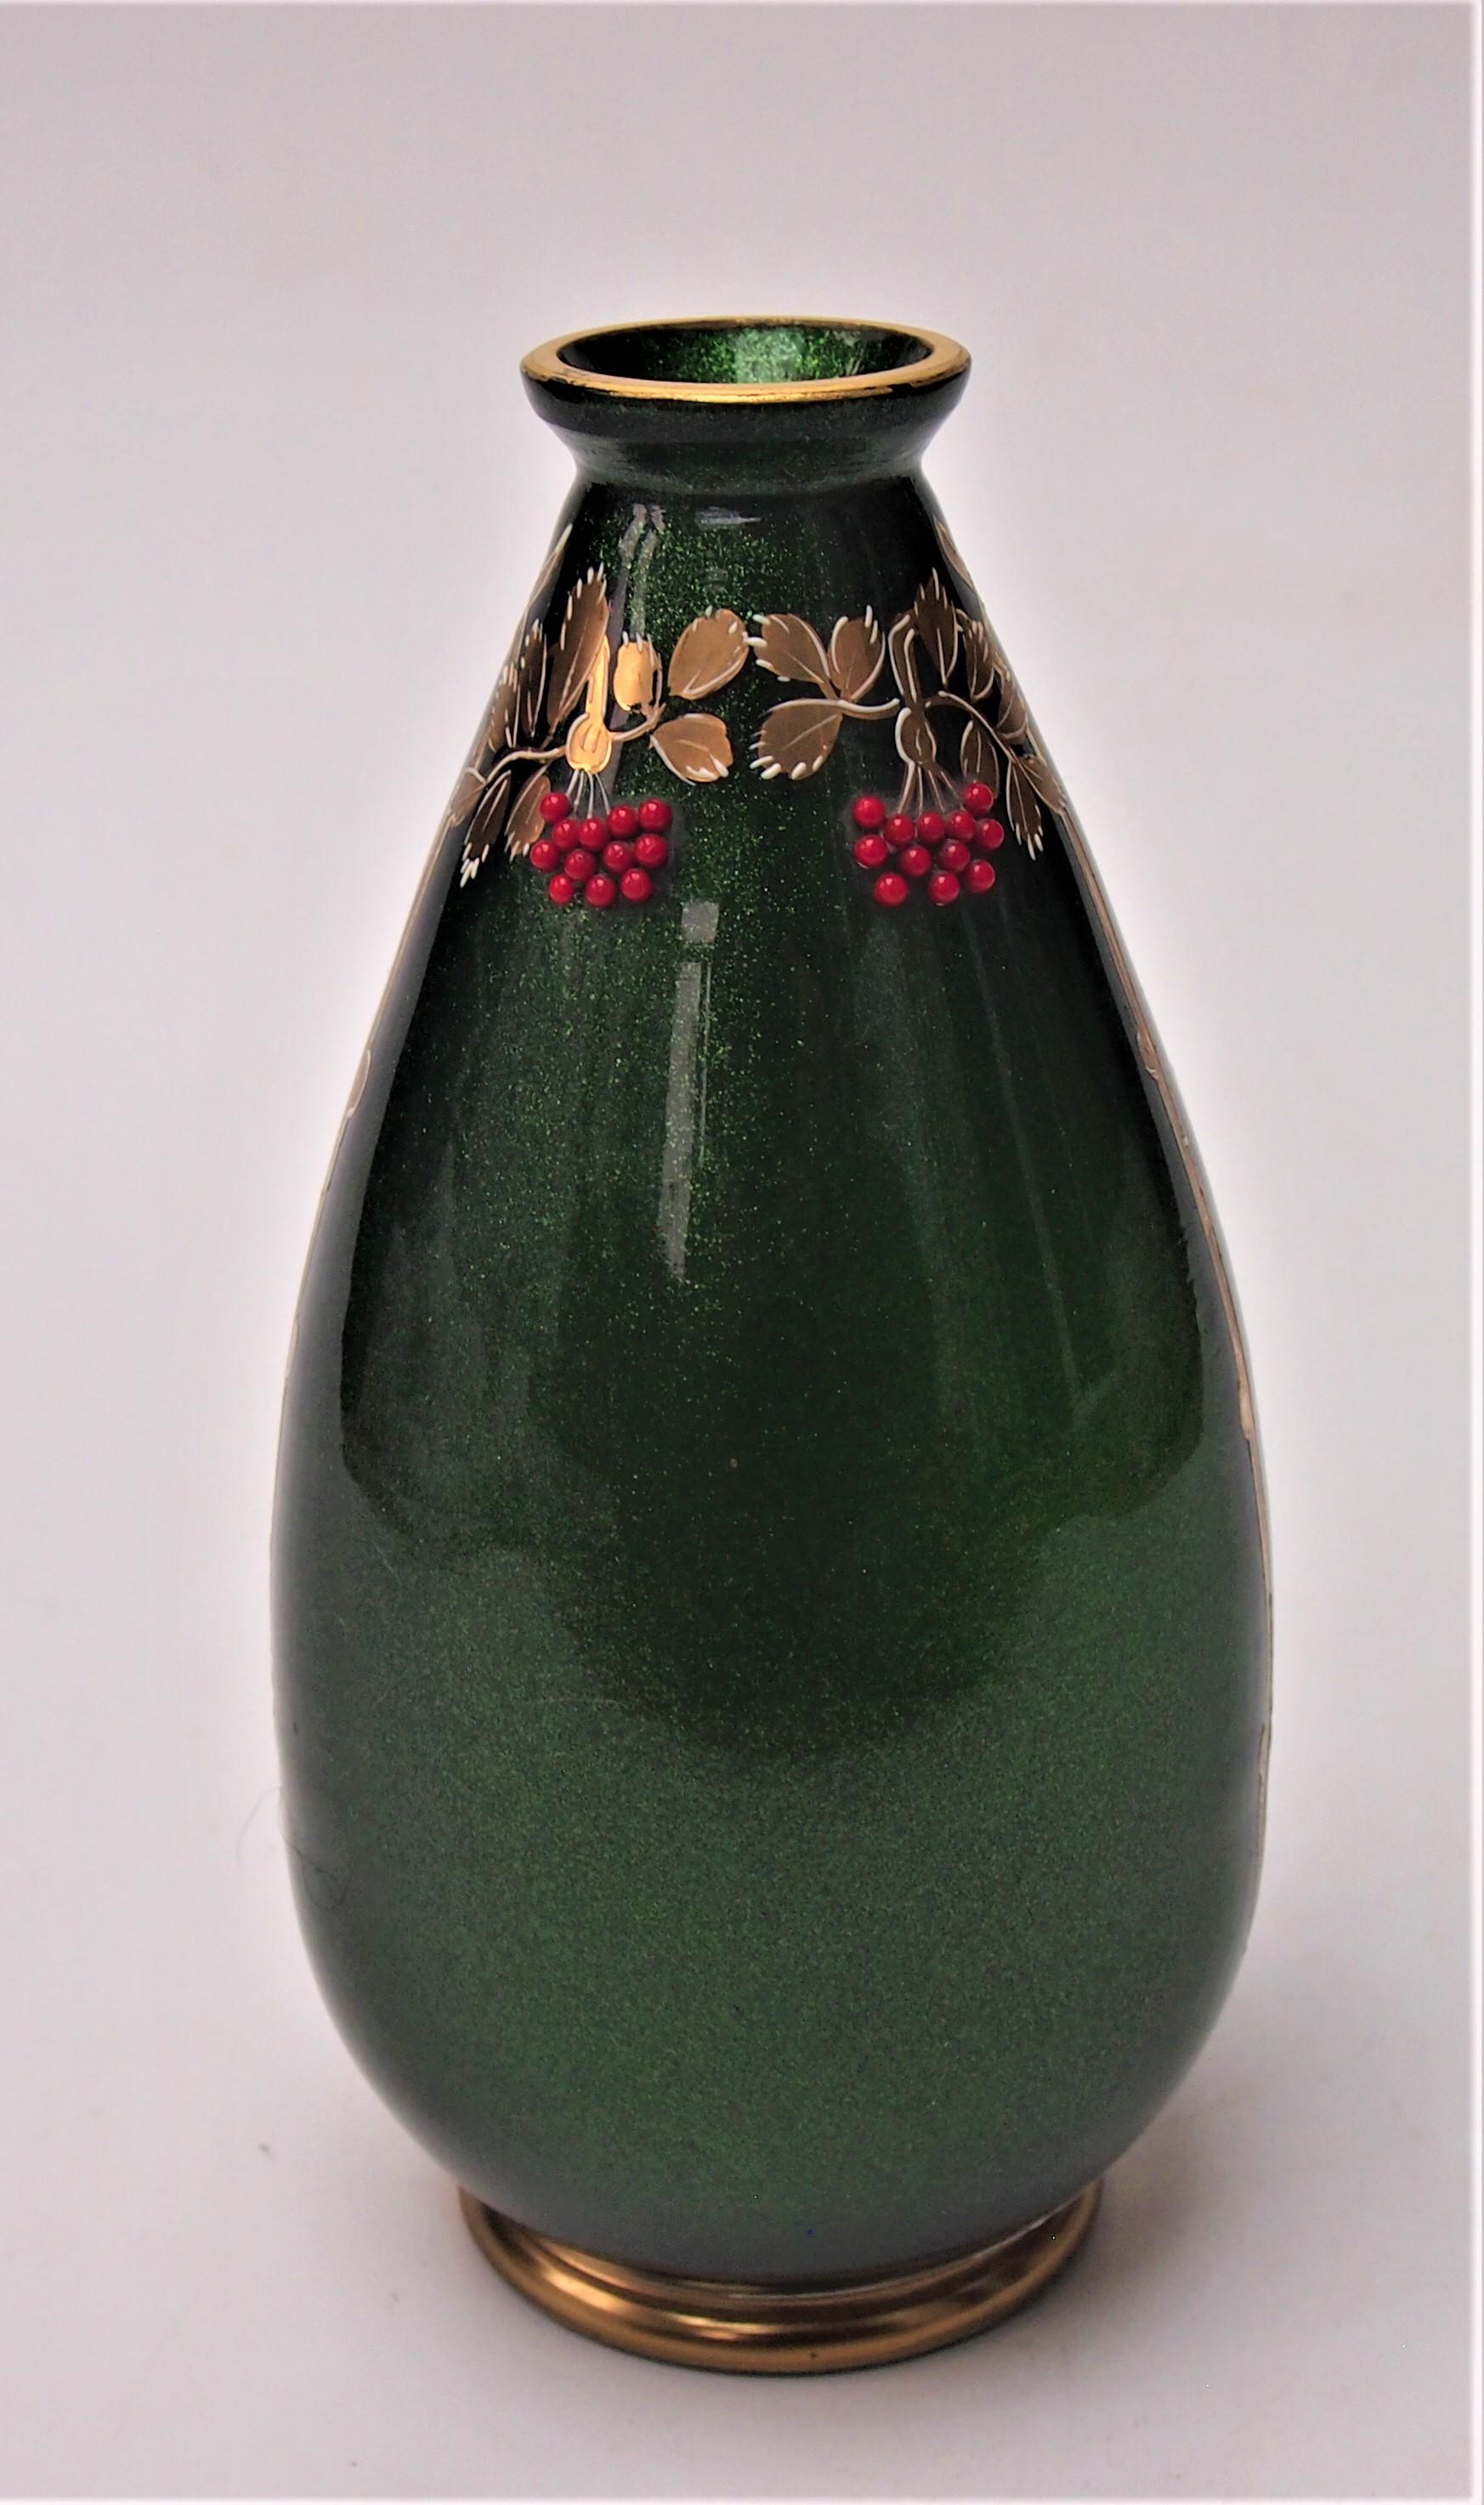 Exceptionally unusual Josephine Hutte green aventurine vase - gilded and enamelled in white in a secessionist style pattern with stylised branches and leaves with tiny applied red bead clusters (in 11s and 12s). Green aventurine is an wonderful